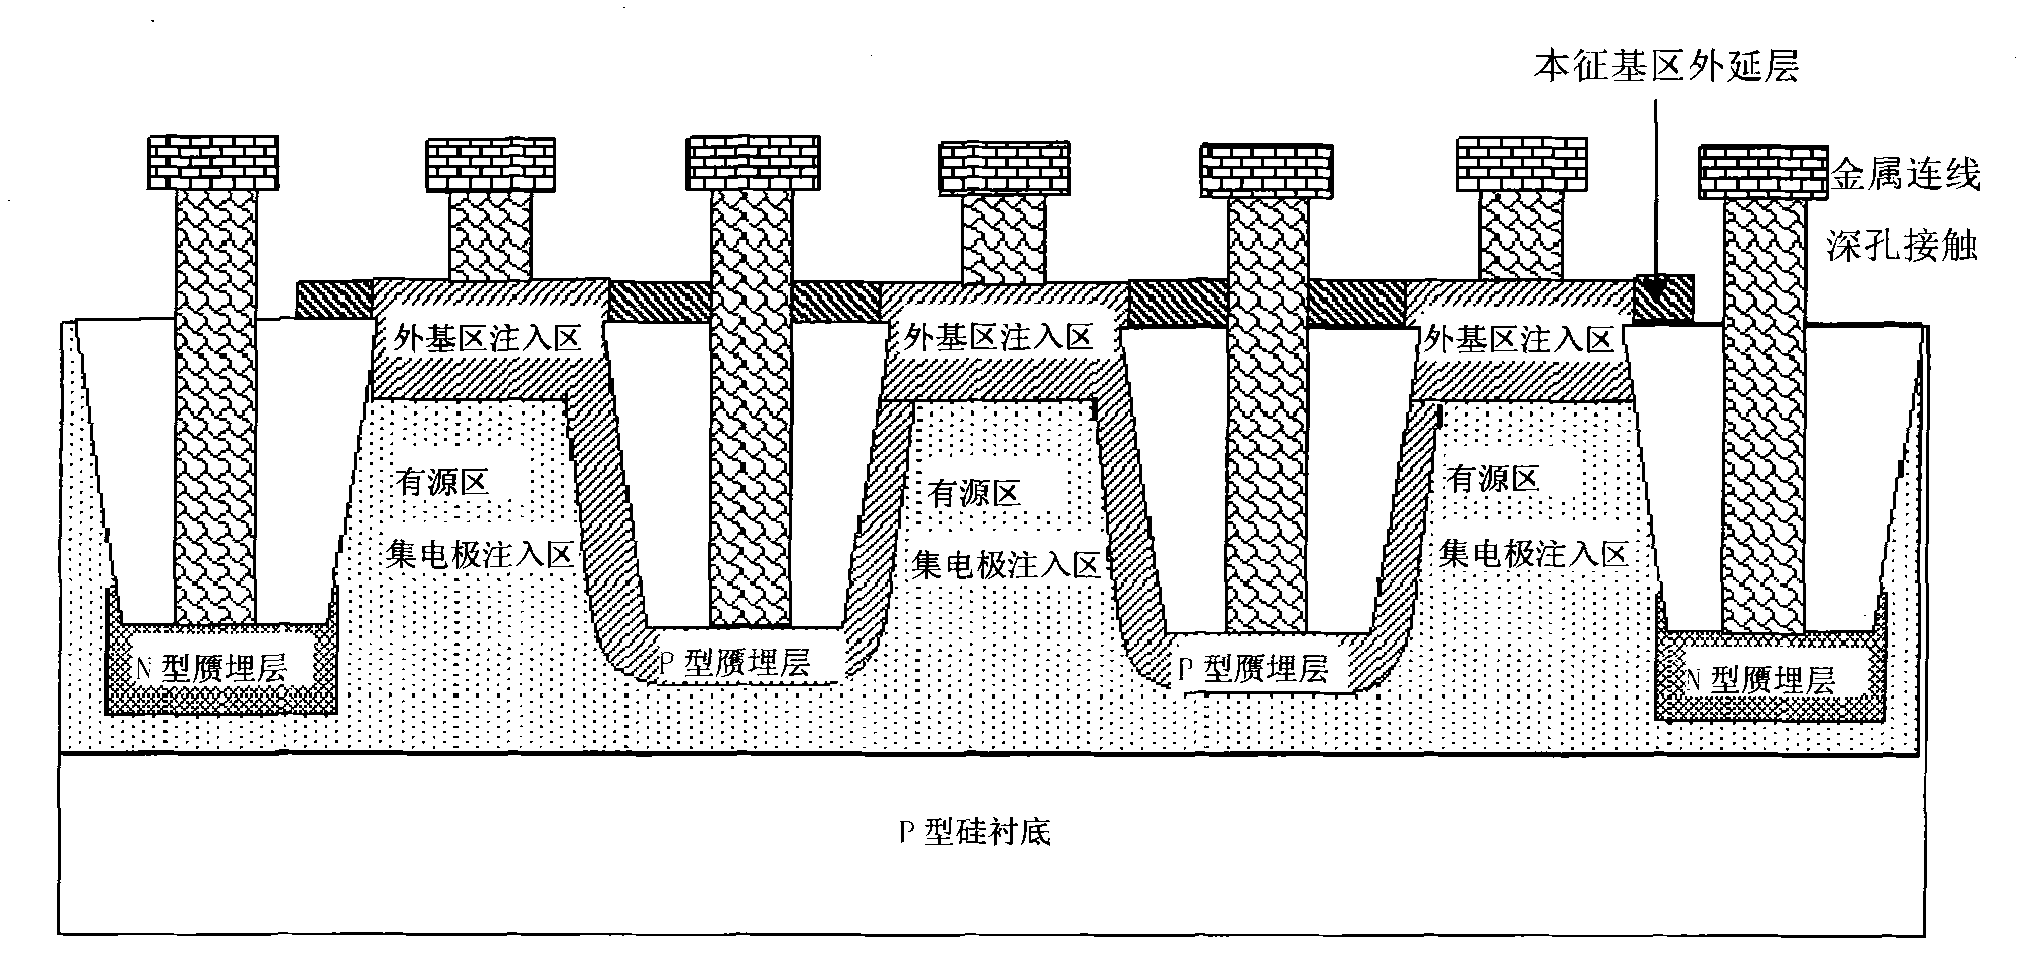 Parasitic PIN(positive-intrinsic negative) diode in BiCMOS(Bipolar Complementary Metal Oxide Semiconductor) process, and manufacturing method thereof